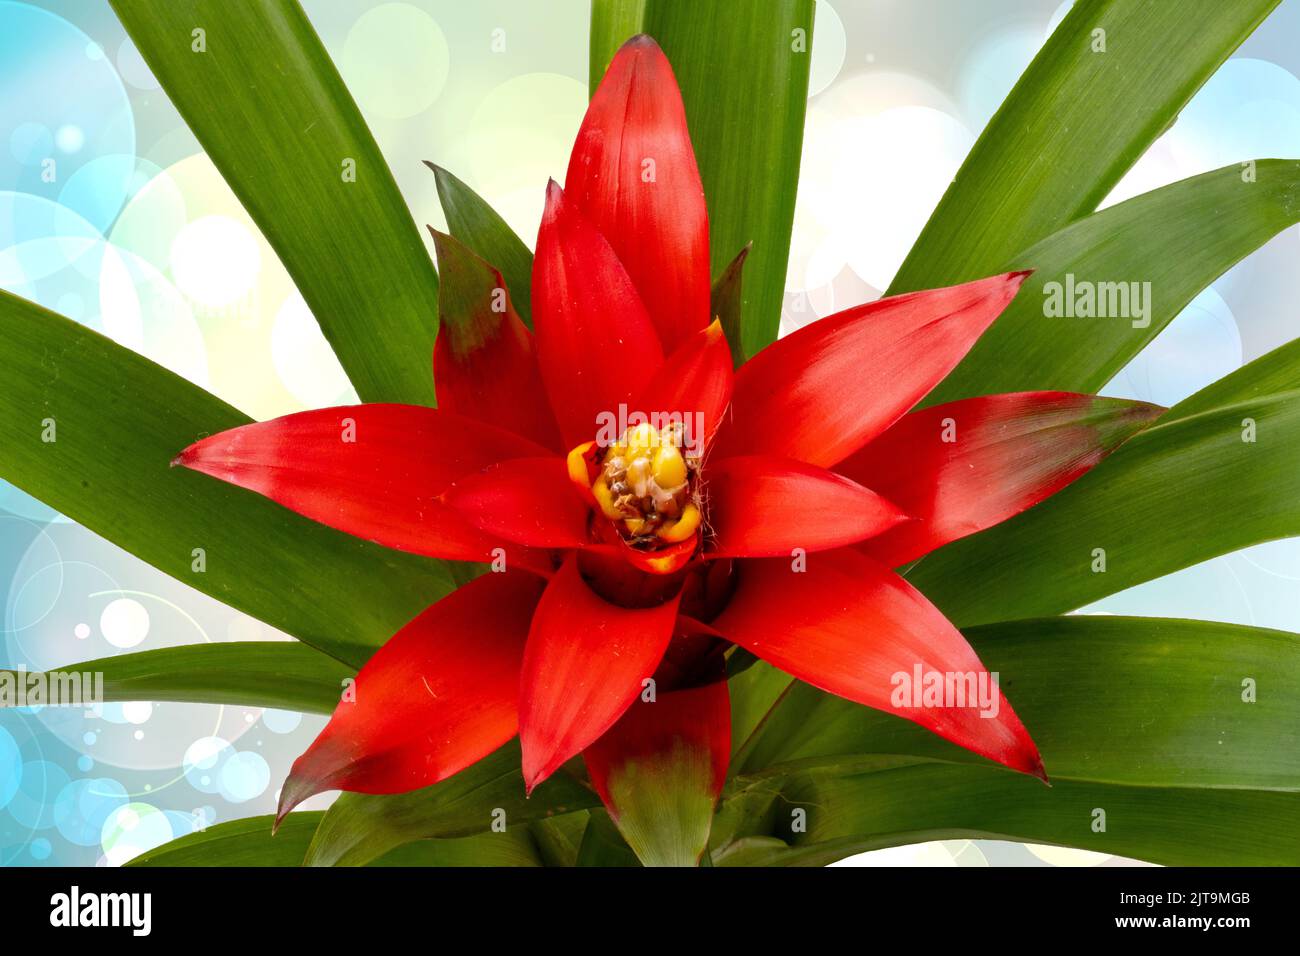 Close-up of a natural beautiful red bromeliads blossom over abstract light blue yellow background. (Guzmania ligulata). Macro. Card concept. Stock Photo